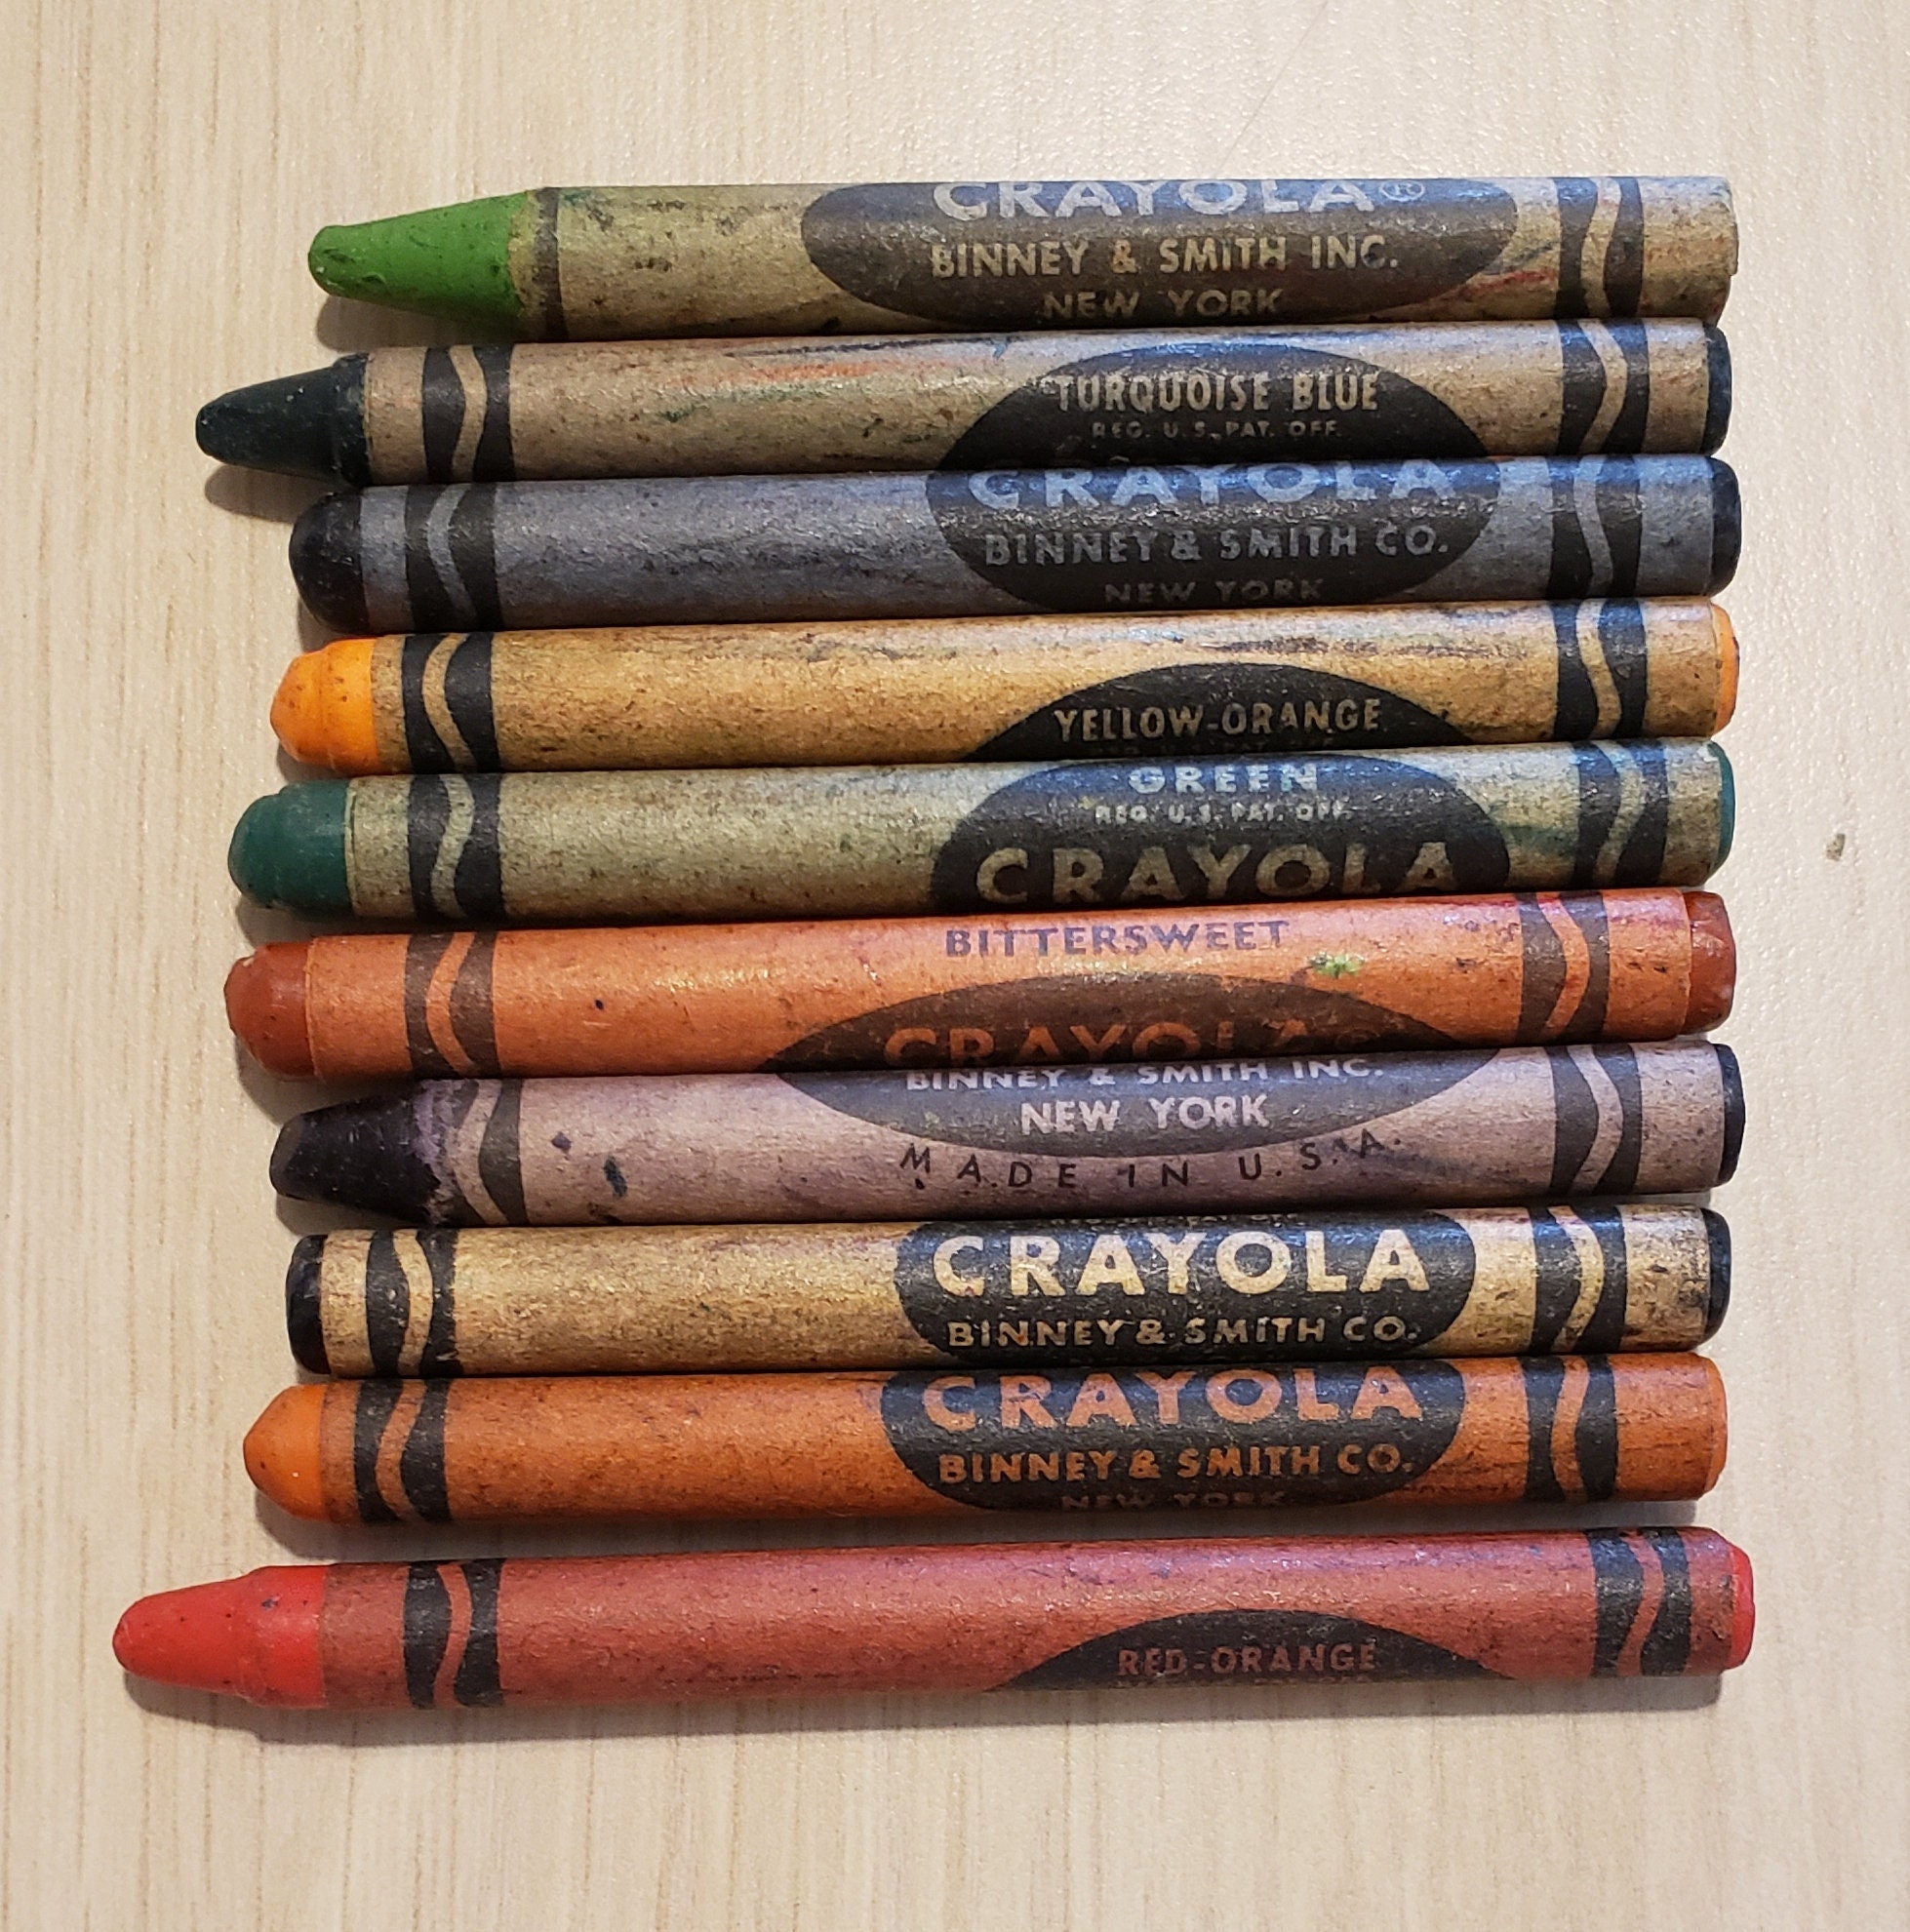 Crayola Magic Scent crayons from the mid-90s! : r/nostalgia